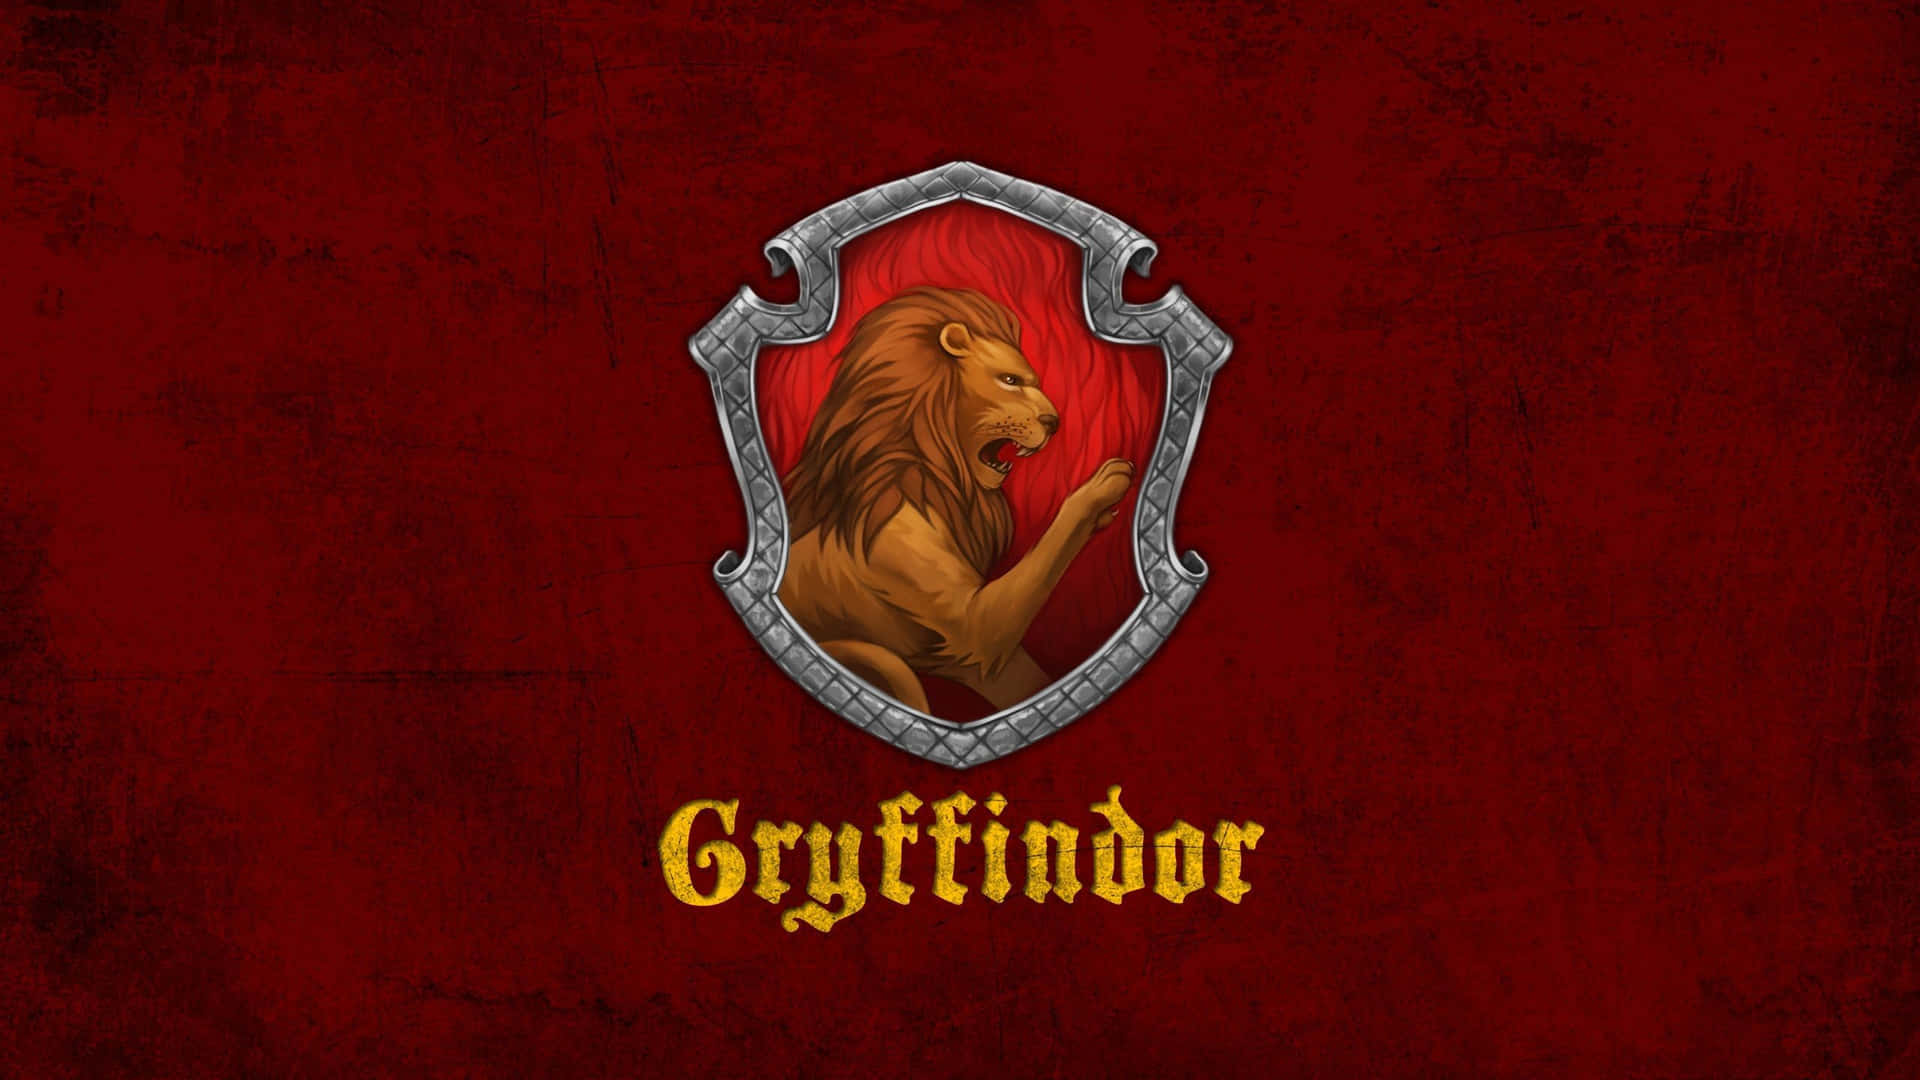 The House of Gryffindor at Hogwarts in the Harry Potter Movie Series Wallpaper